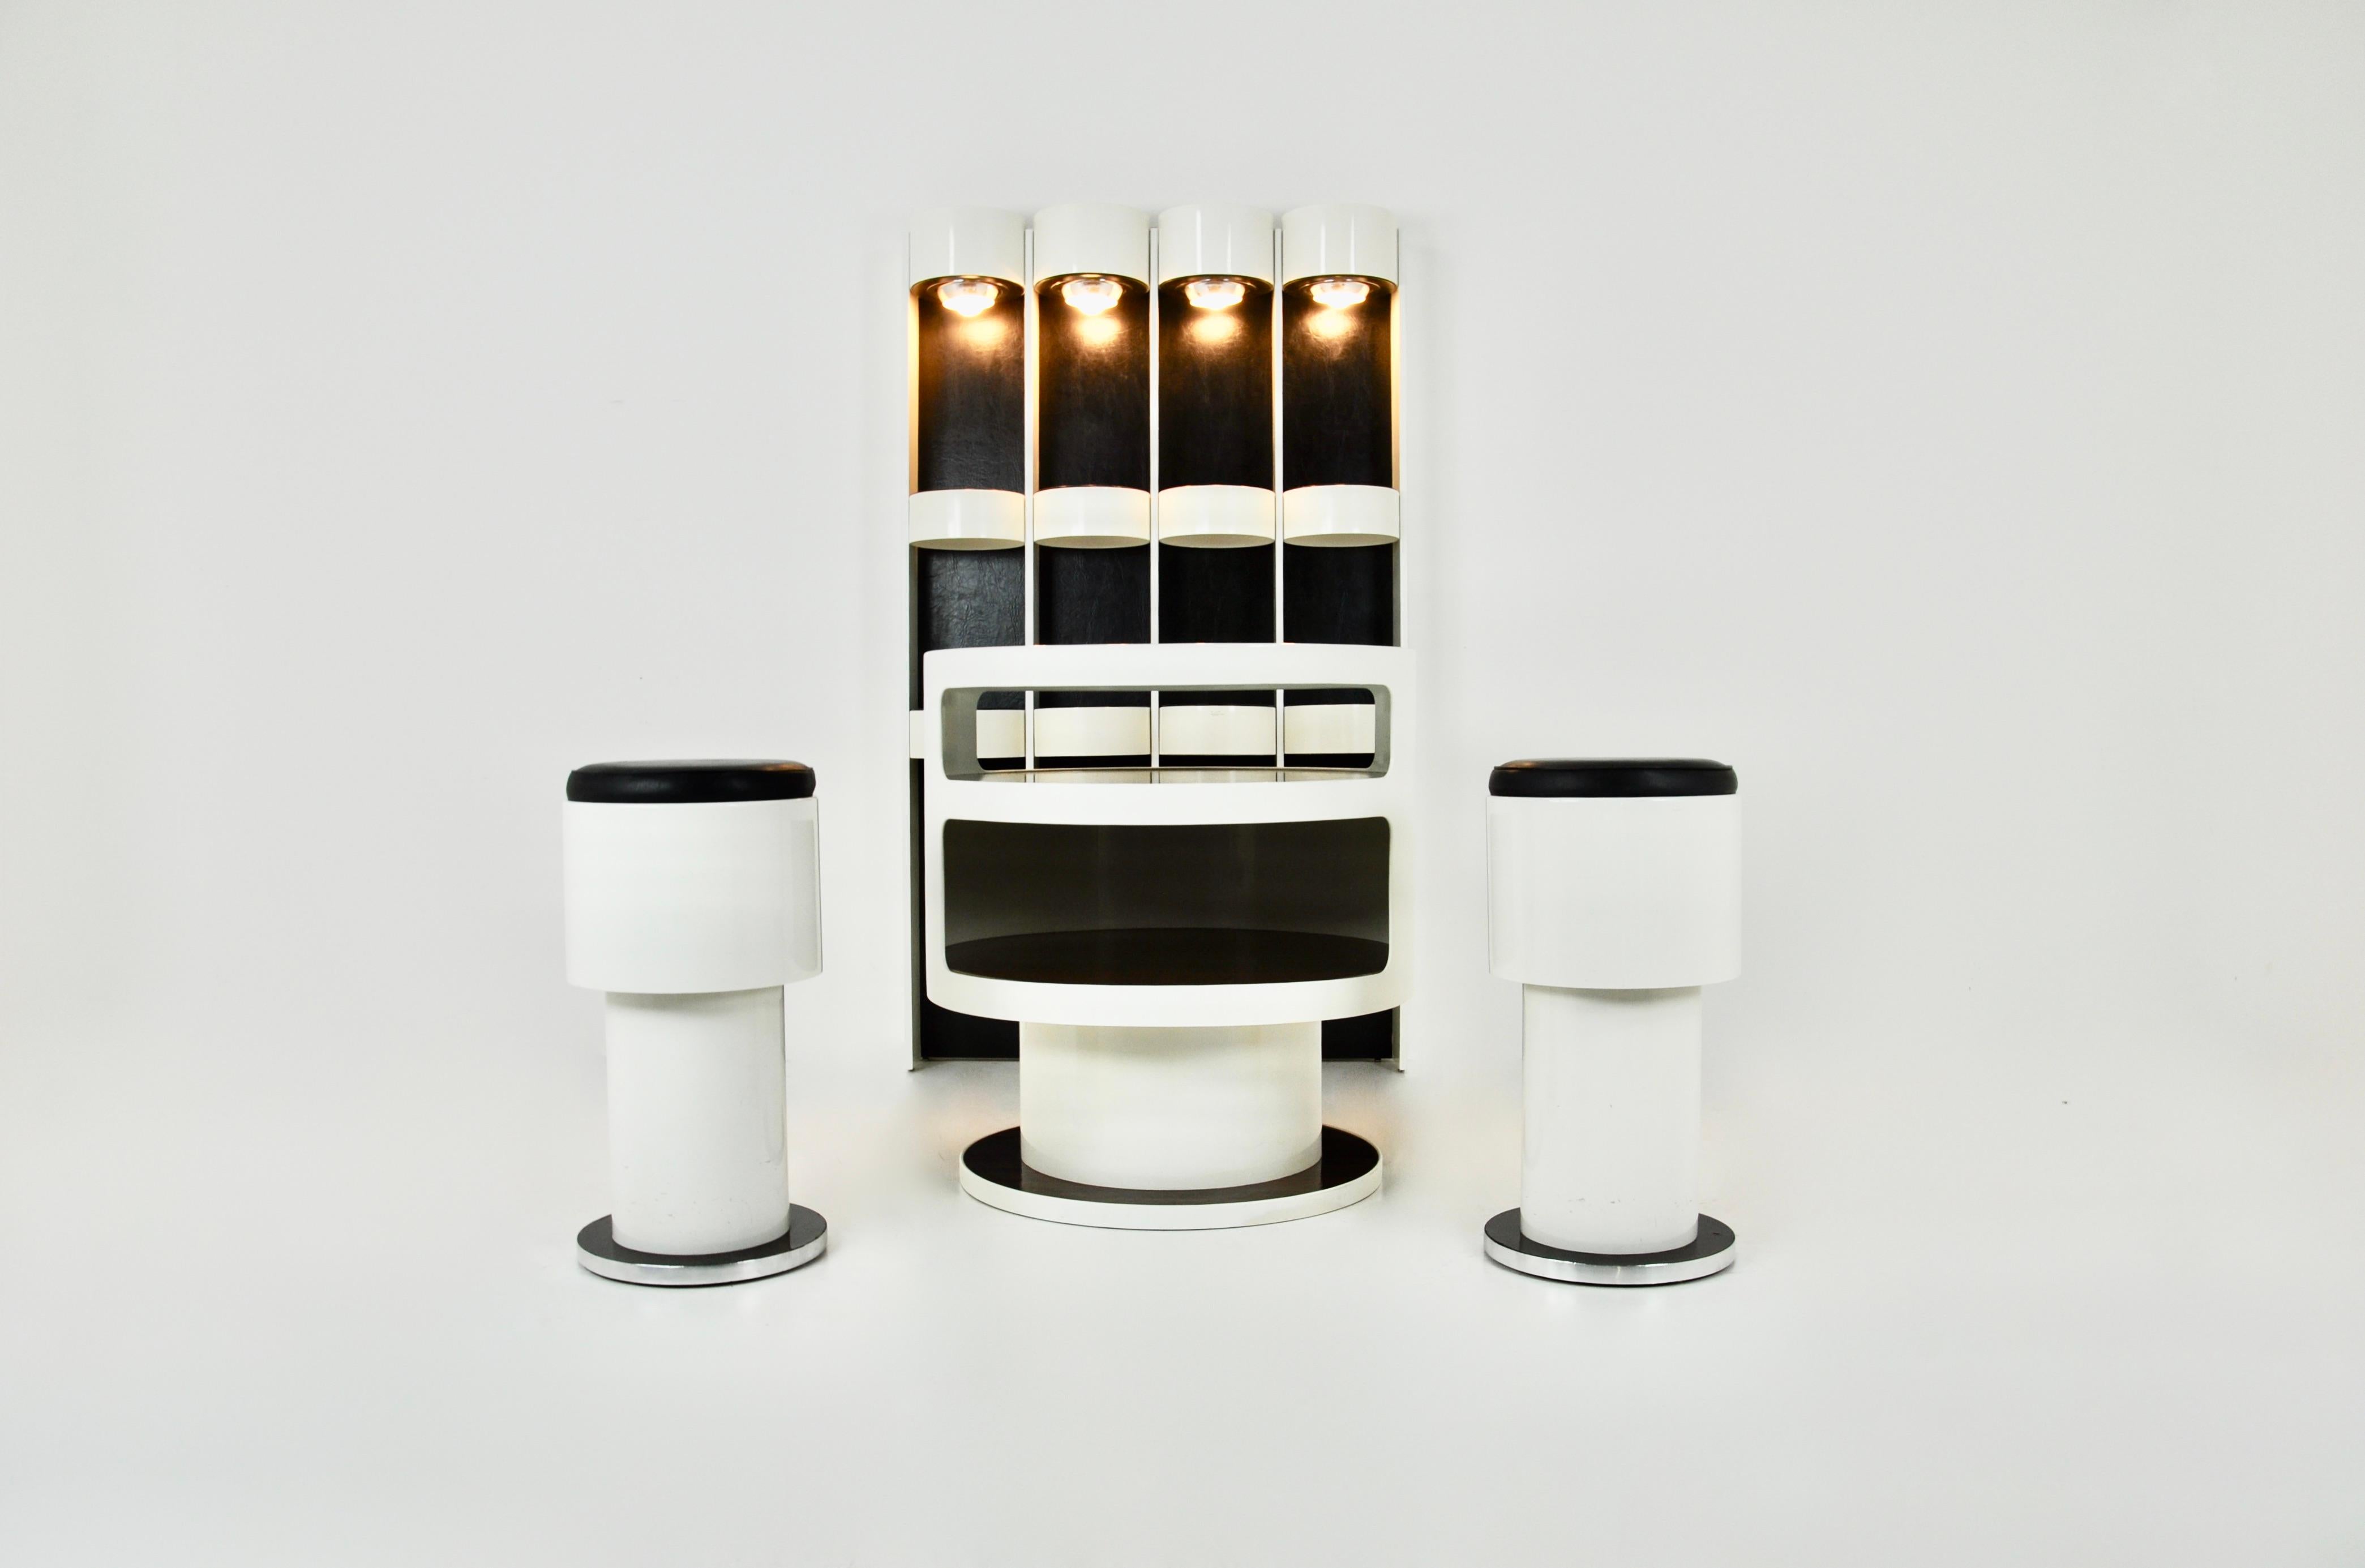 White and black bar set, comprising two stools, a central piece of furniture and a back piece of furniture with lighting. This set was designed by Joe Colombo and is made of leather, plastic, glass and wood.
Dimensions of the set:
Cabinet: H: 188cm